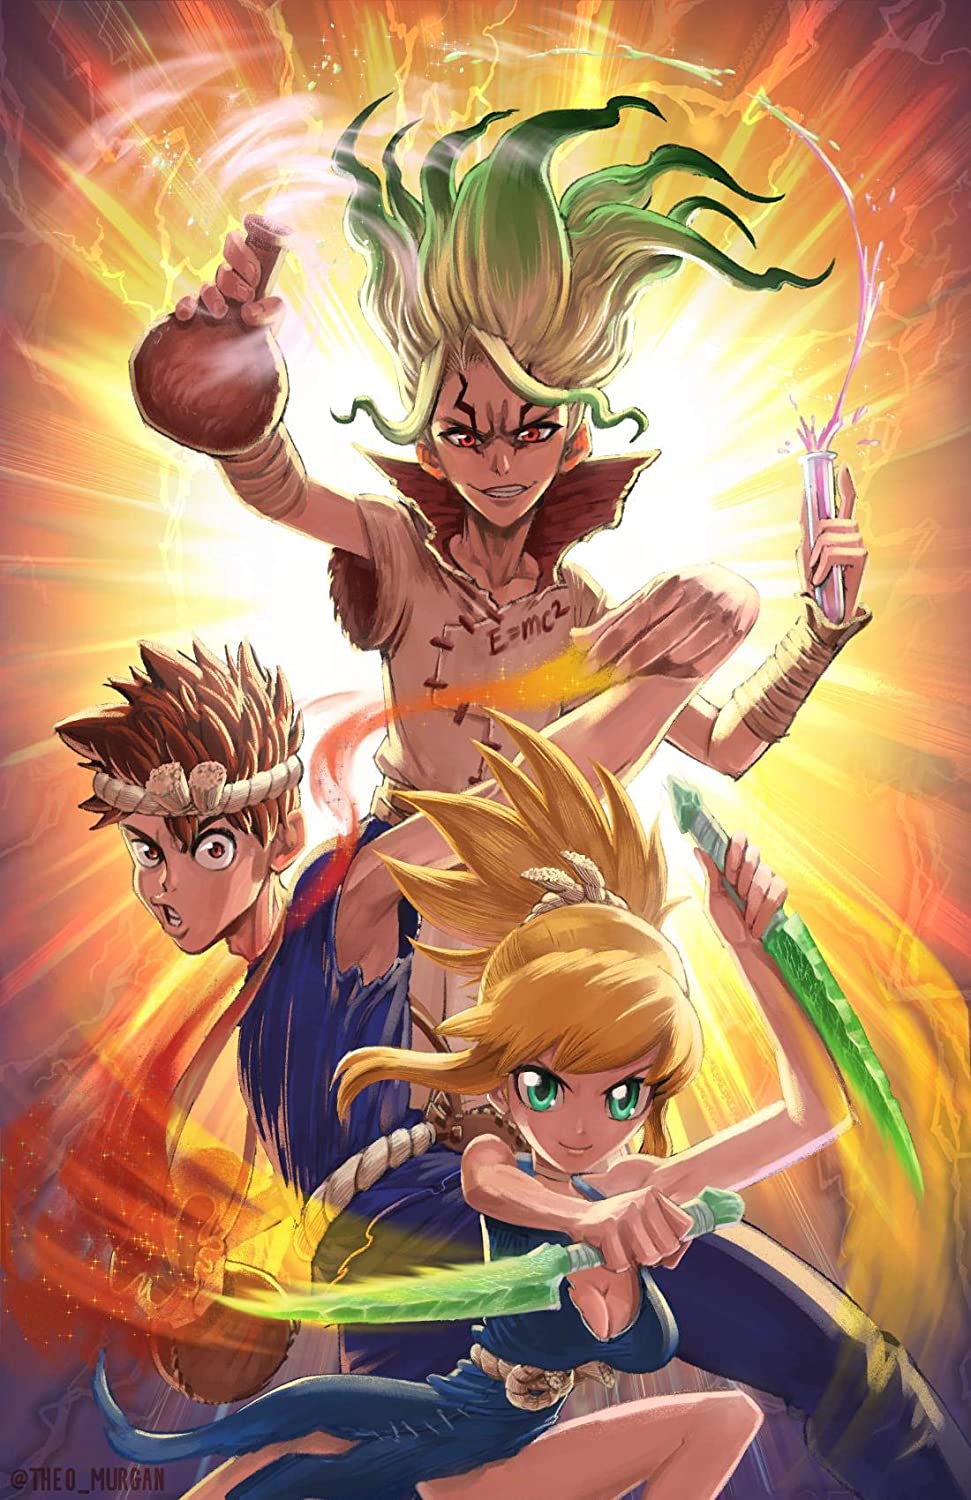 Dr. Stone Stone Wars Poster Wall Print Wall Decor Wallpaper Anime Home Decor Dr. Stone Gift for Her Gift for Him: Handmade